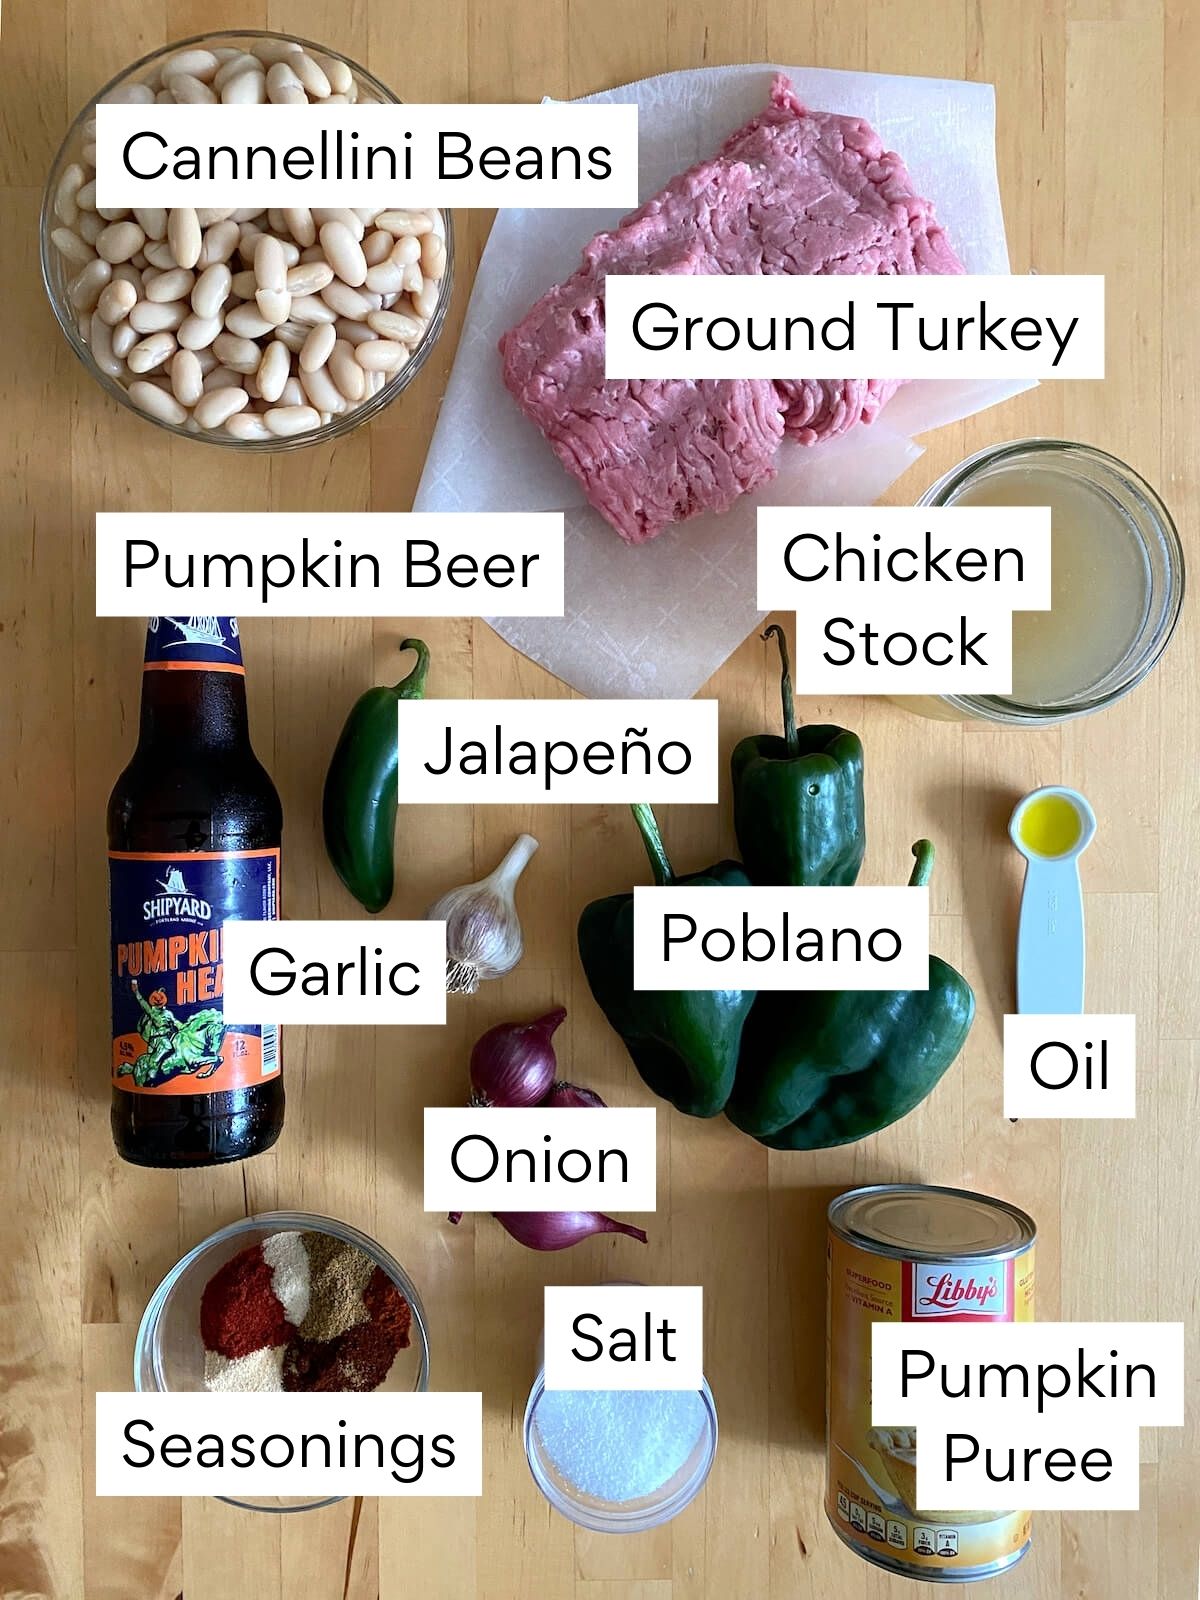 The ingredients to make pumpkin white bean chili with ground turkey. Each ingredient is labeled with text. They include cannellini beans, ground turkey, pumpkin beer, chicken stock, jalapeño, garlic, poblano, onion, oil, seasonings, salt, pumpkin puree.